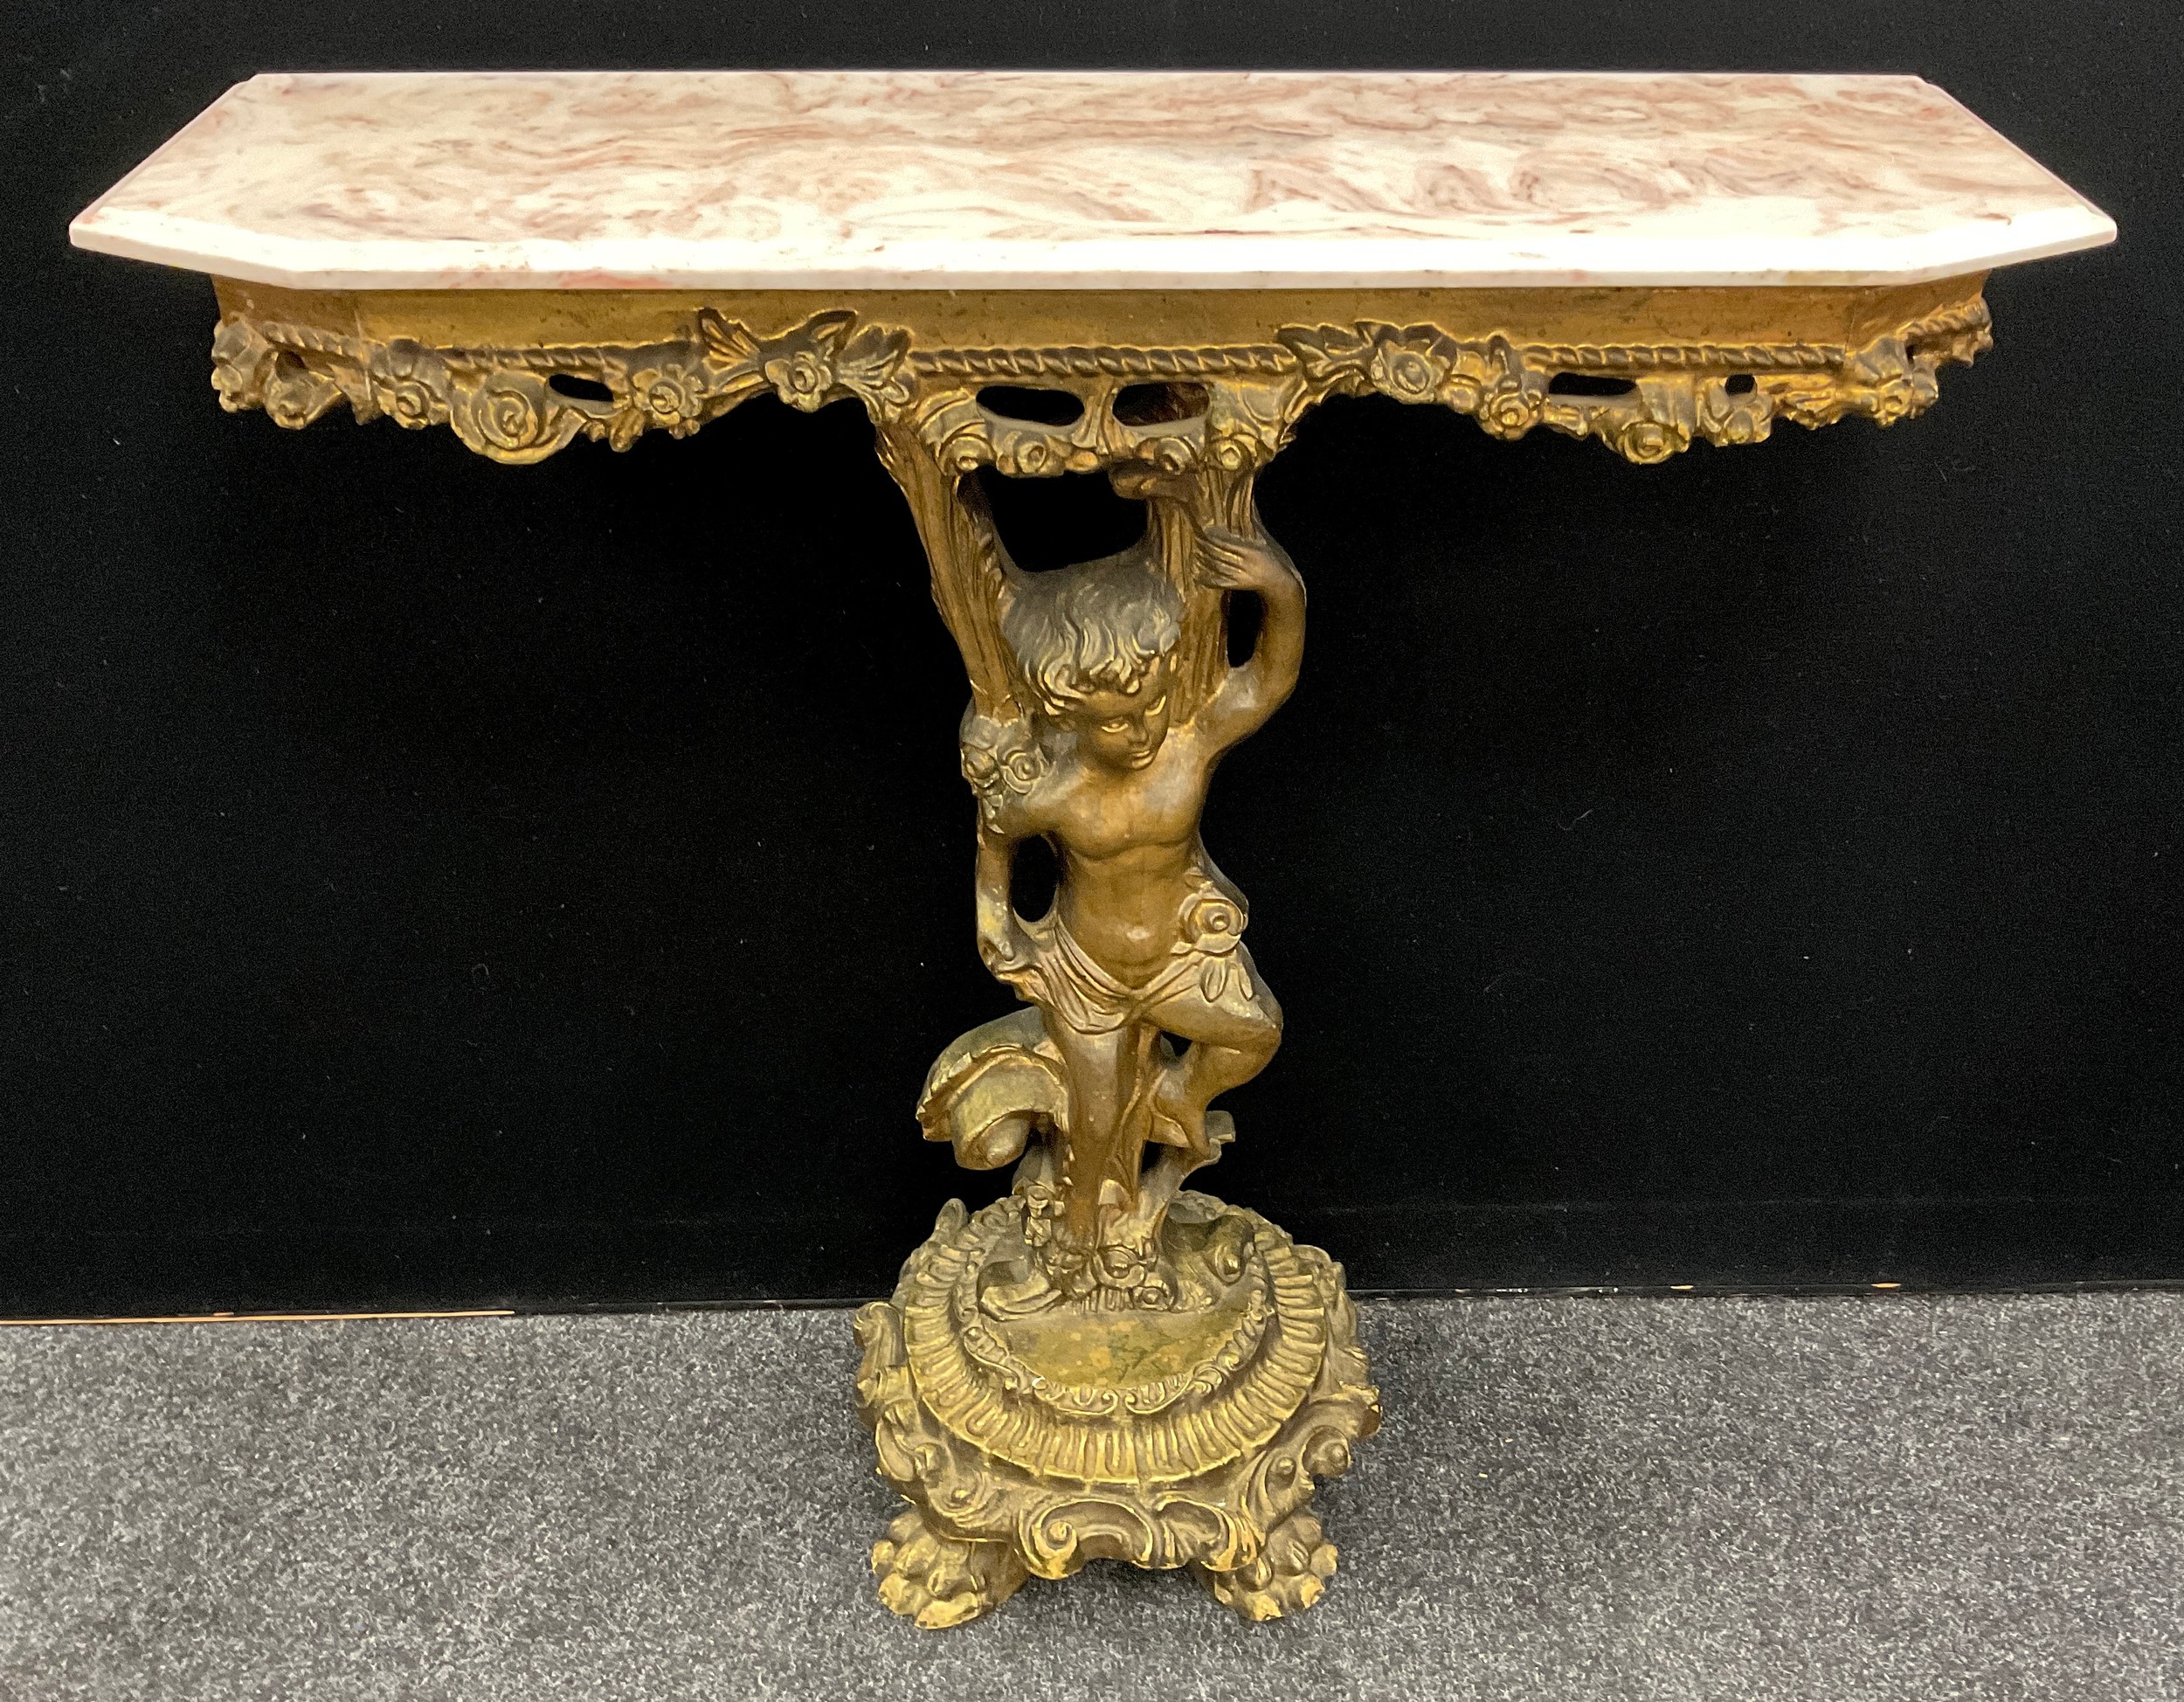 A Neo-classical revival hall table, ‘gilt’ painted pedestal base with a Putti, single arm held aloft